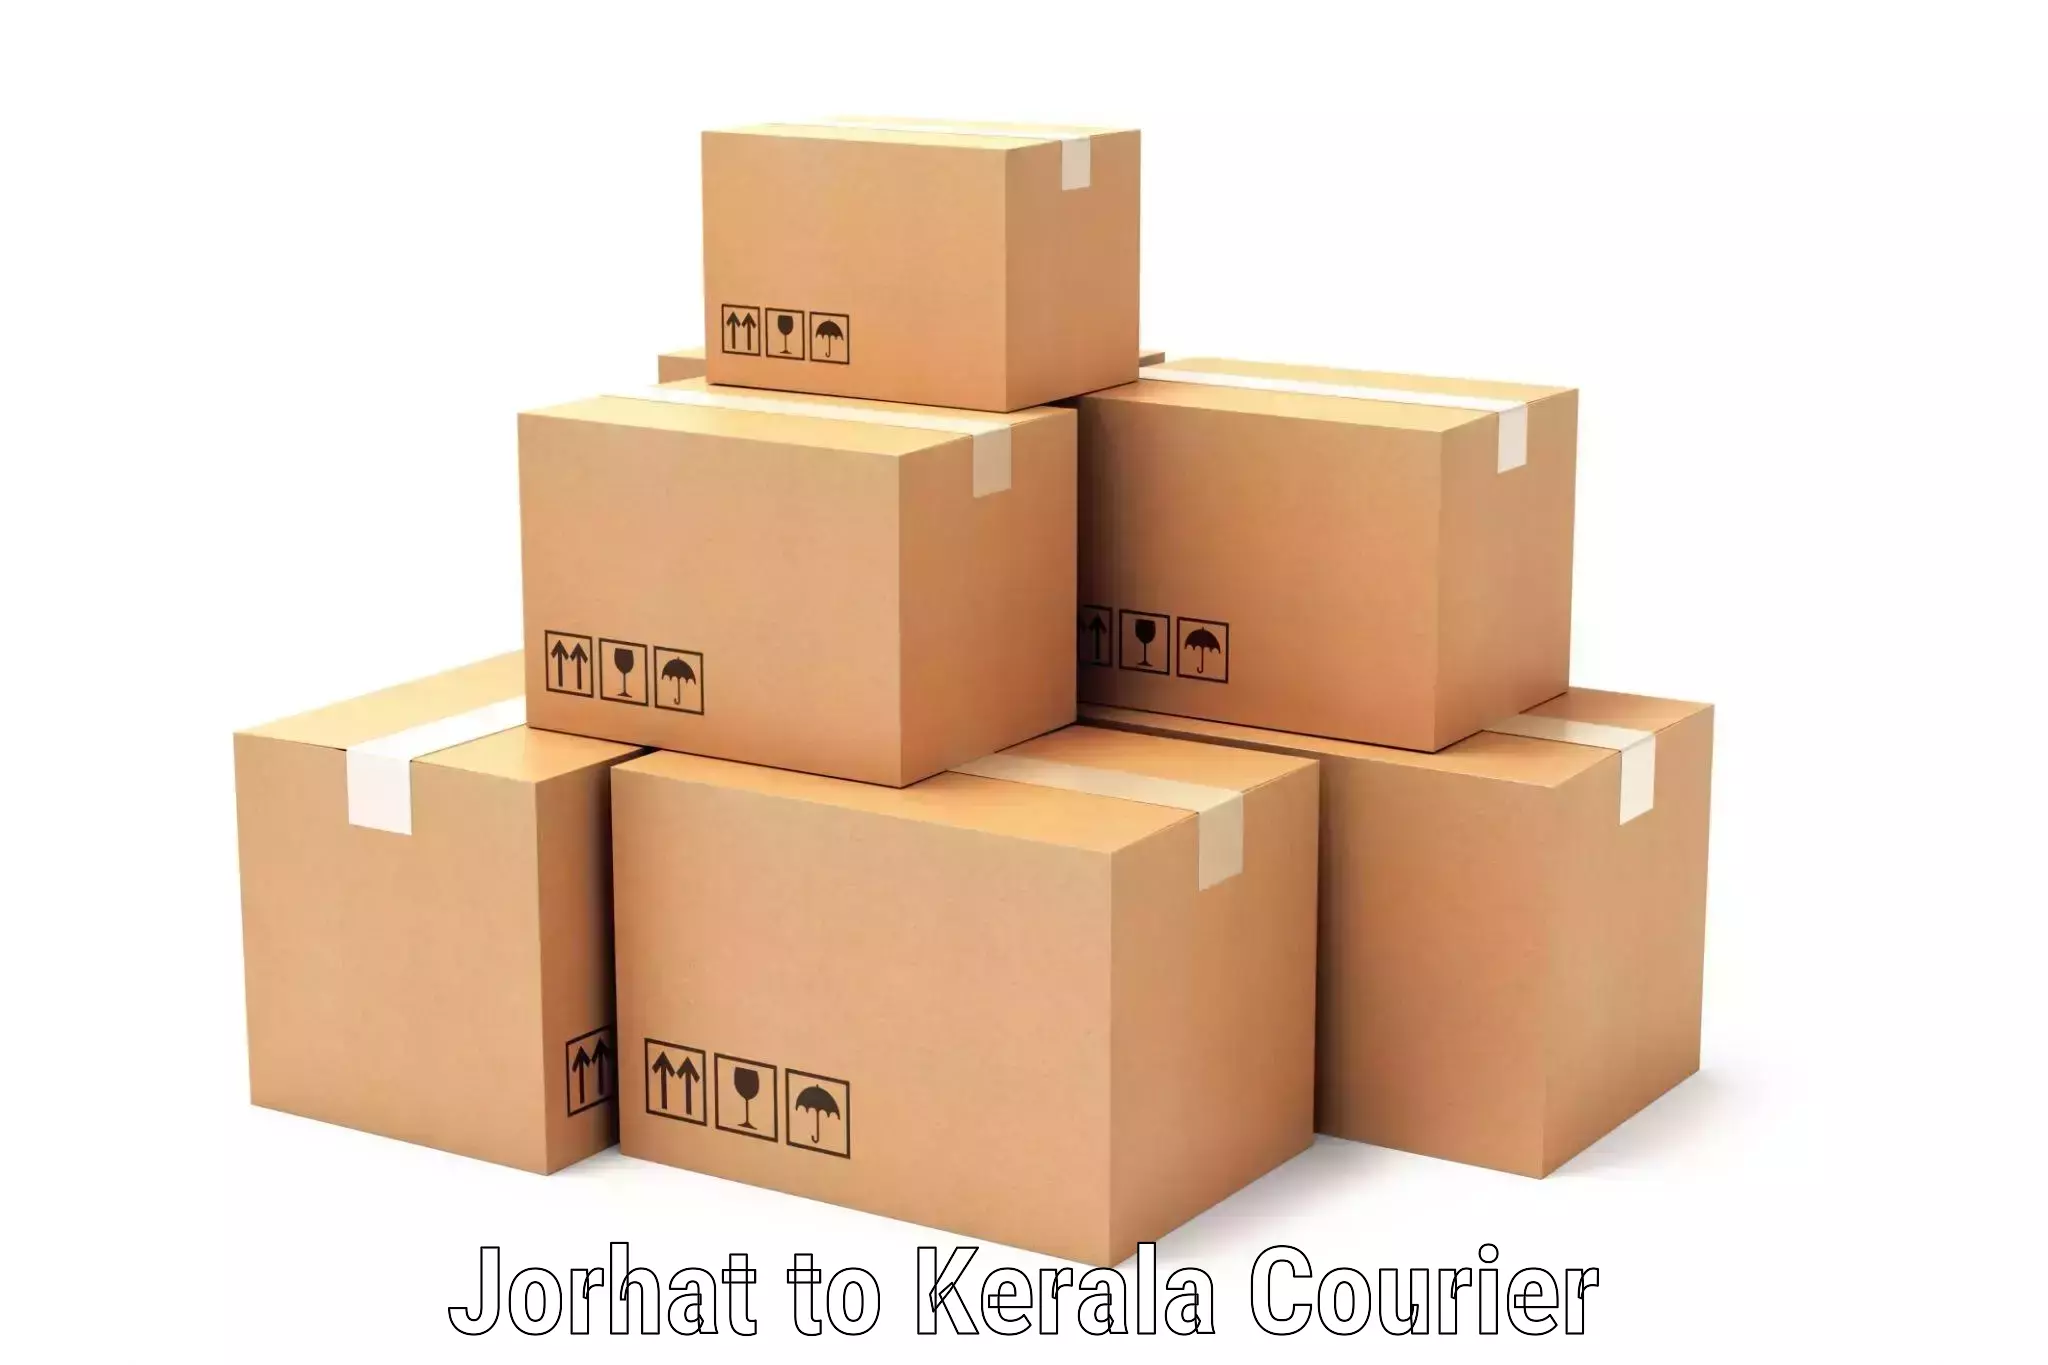 Sustainable courier practices Jorhat to Mahe